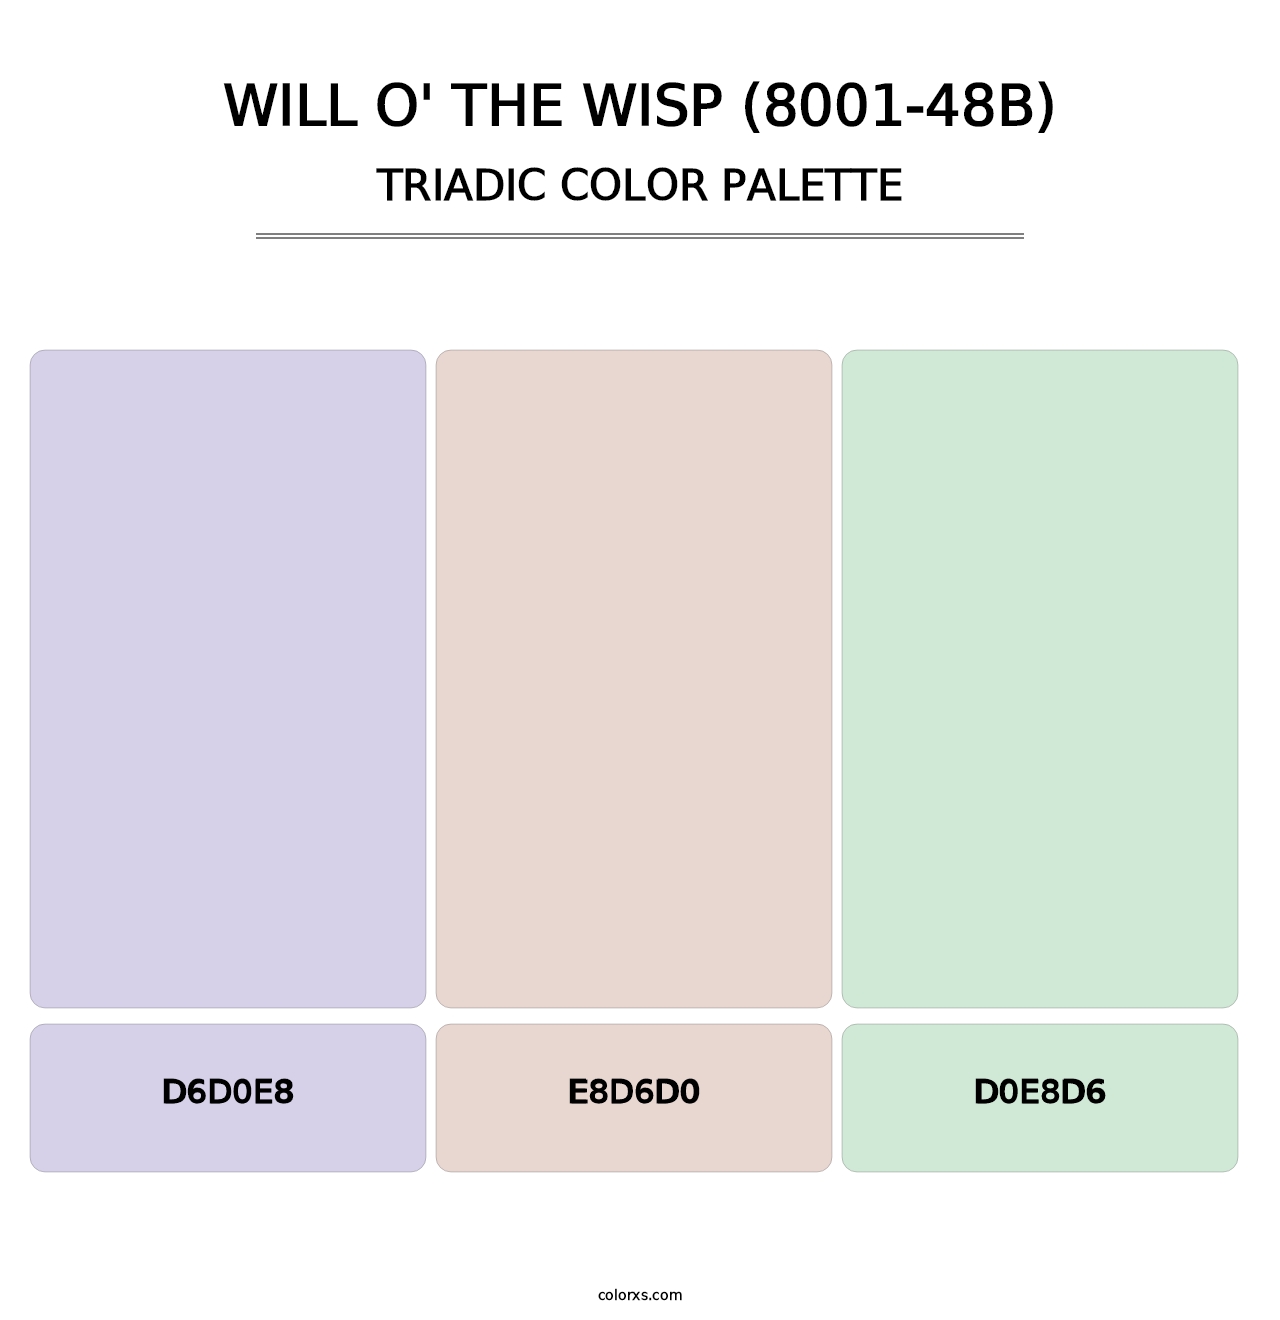 Will o' the Wisp (8001-48B) - Triadic Color Palette